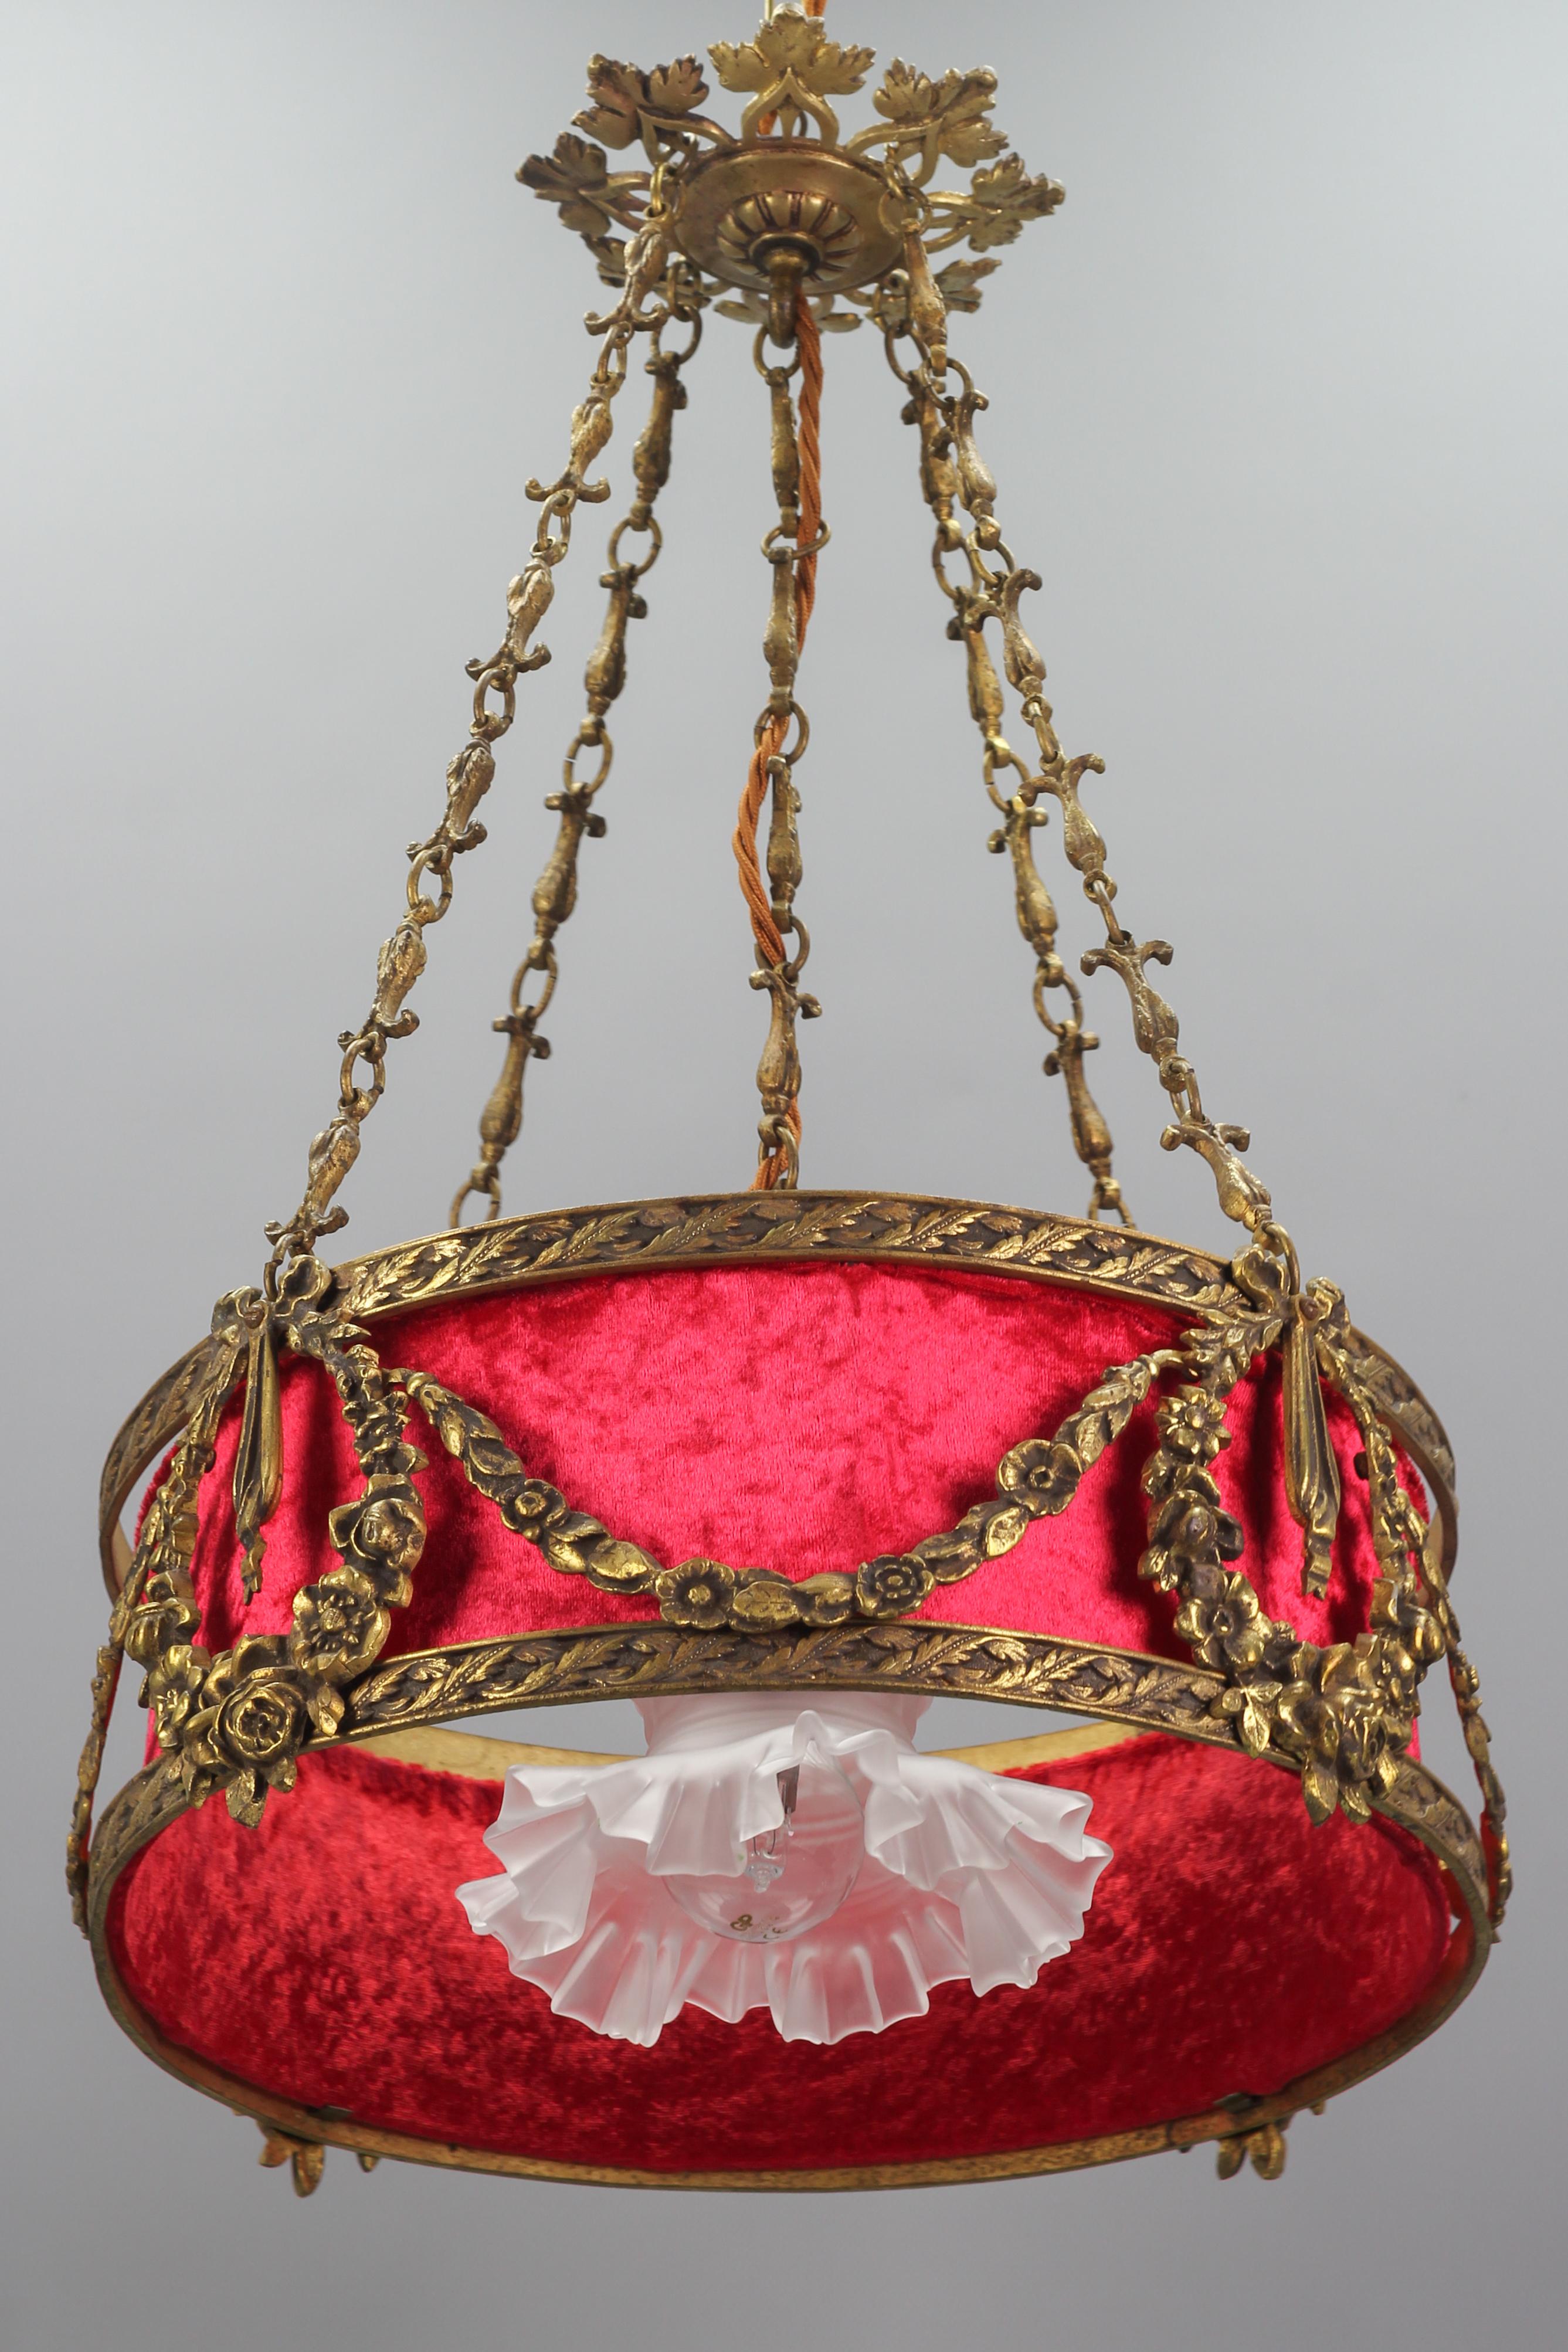 An elegant French Louis XVI style bronze chandelier with red fabric drum lampshade. This beautiful chandelier is suspended by four ornate bronze chains and features bronze floral garlands, tied with decorative bows. One central interior light -